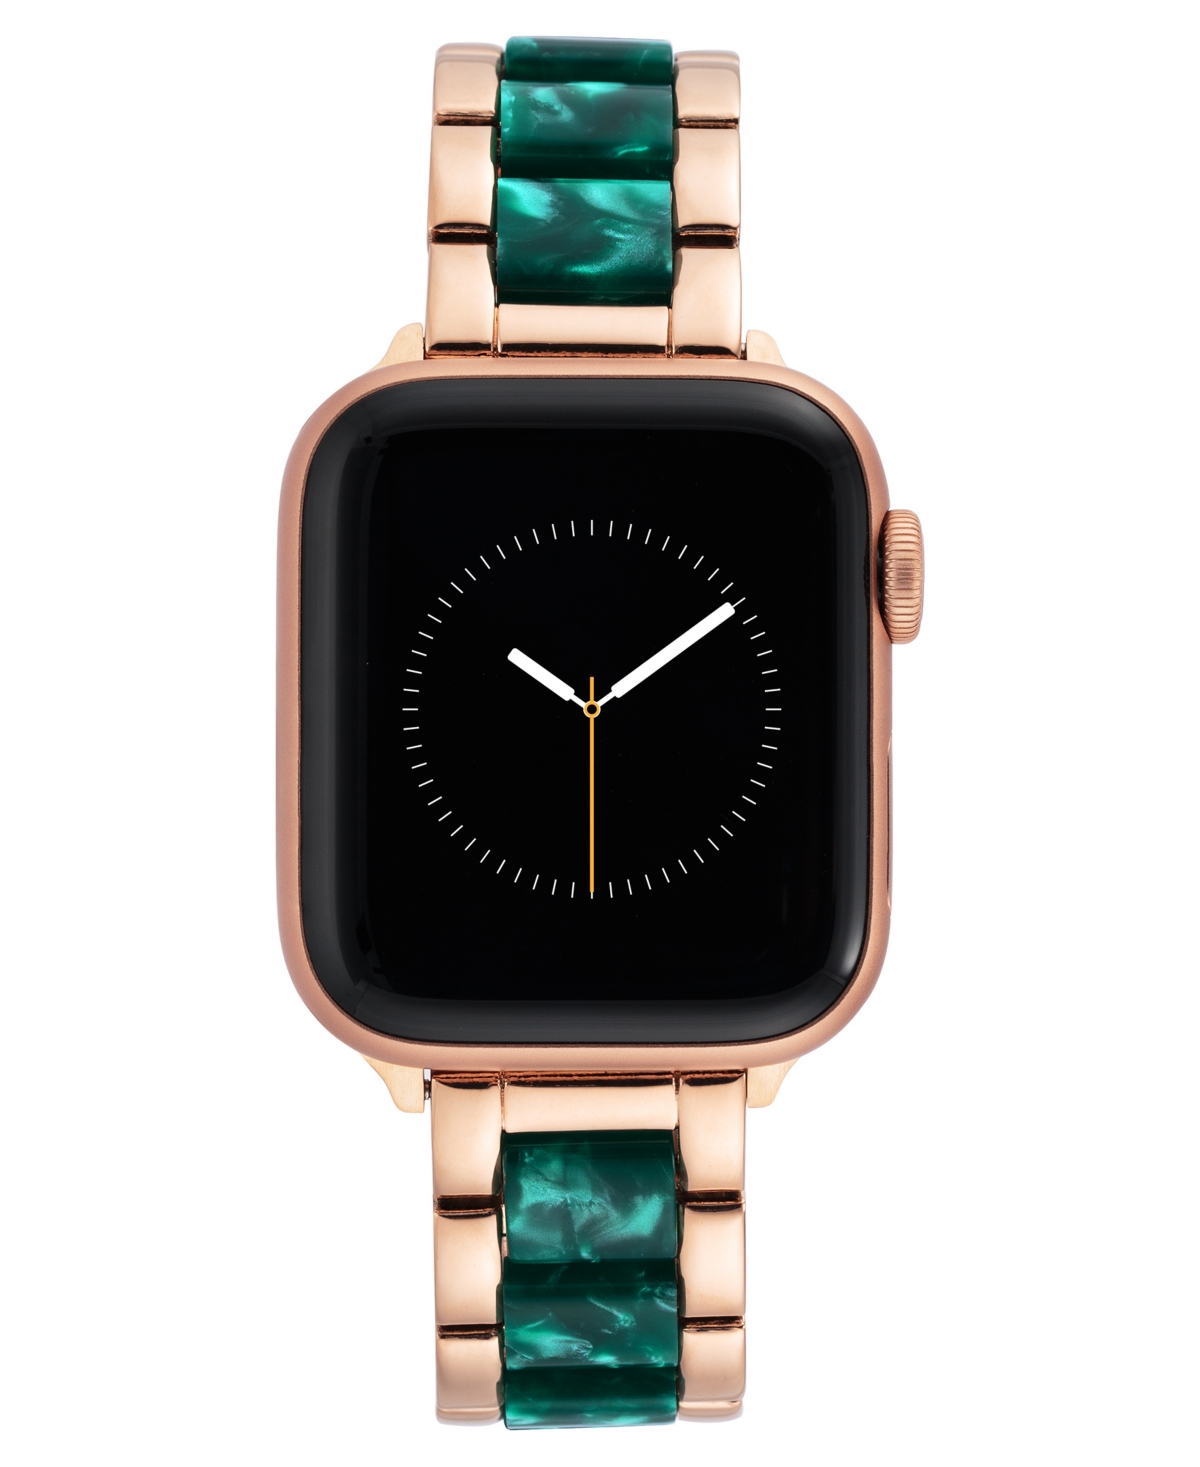 42/44/45mm Apple Watch Bracelet in Green Resin and Rose Gold Stainless Steel With Rose Gold Adaptors - Green, Rose Gold Tone